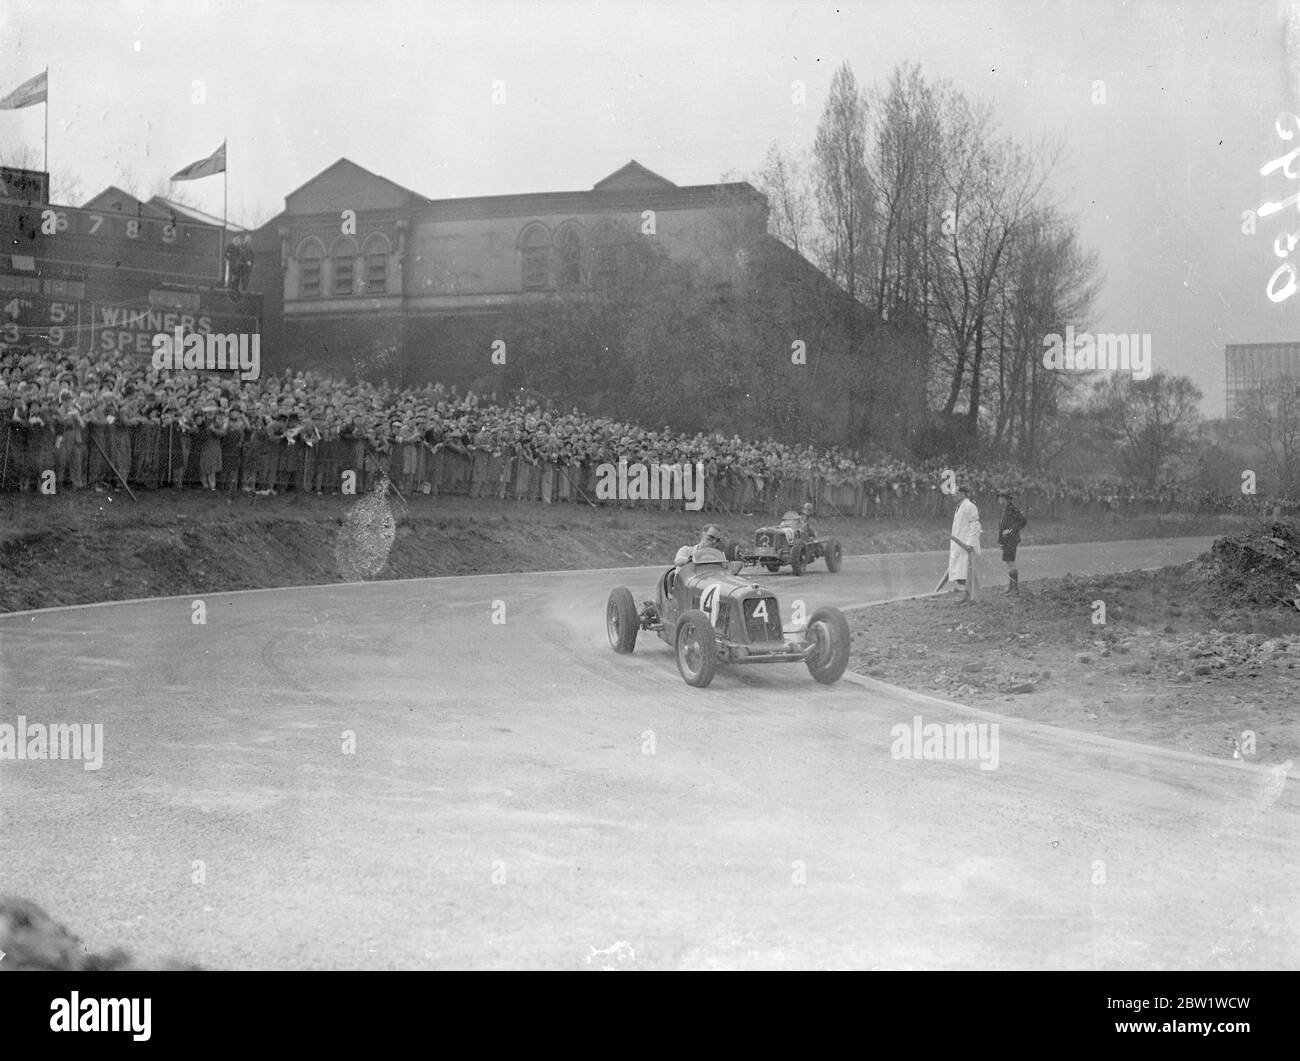 Coronation Trophy race on new Crystal Palace circuit. The Coronation Trophy race was the inaugural event the new Crystal Palace road racing circuit. Many famous drivers were entered and speed so husband 20 miles an hour were expected. Photo shows, E K Rayson ' s ,Maserati ( No 4) leading I F Connell's ERA around a bend 24 April 1937 Stock Photo